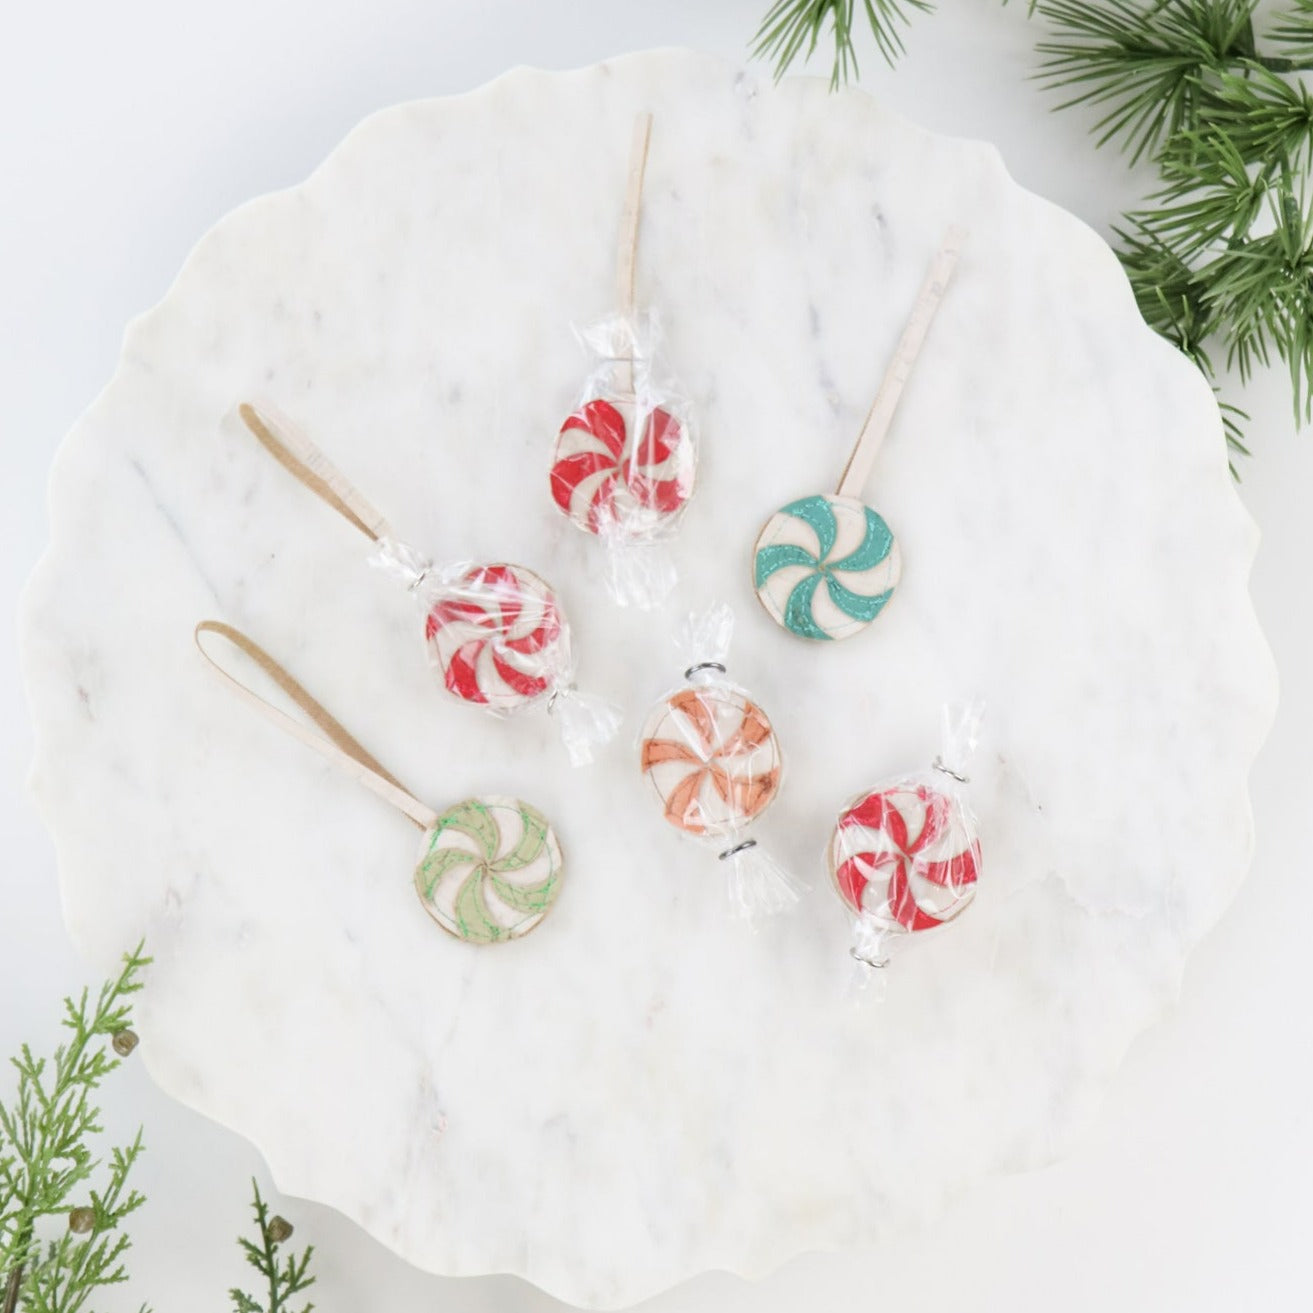 FREE! Candy Cane Swirl Ornament Instant Download